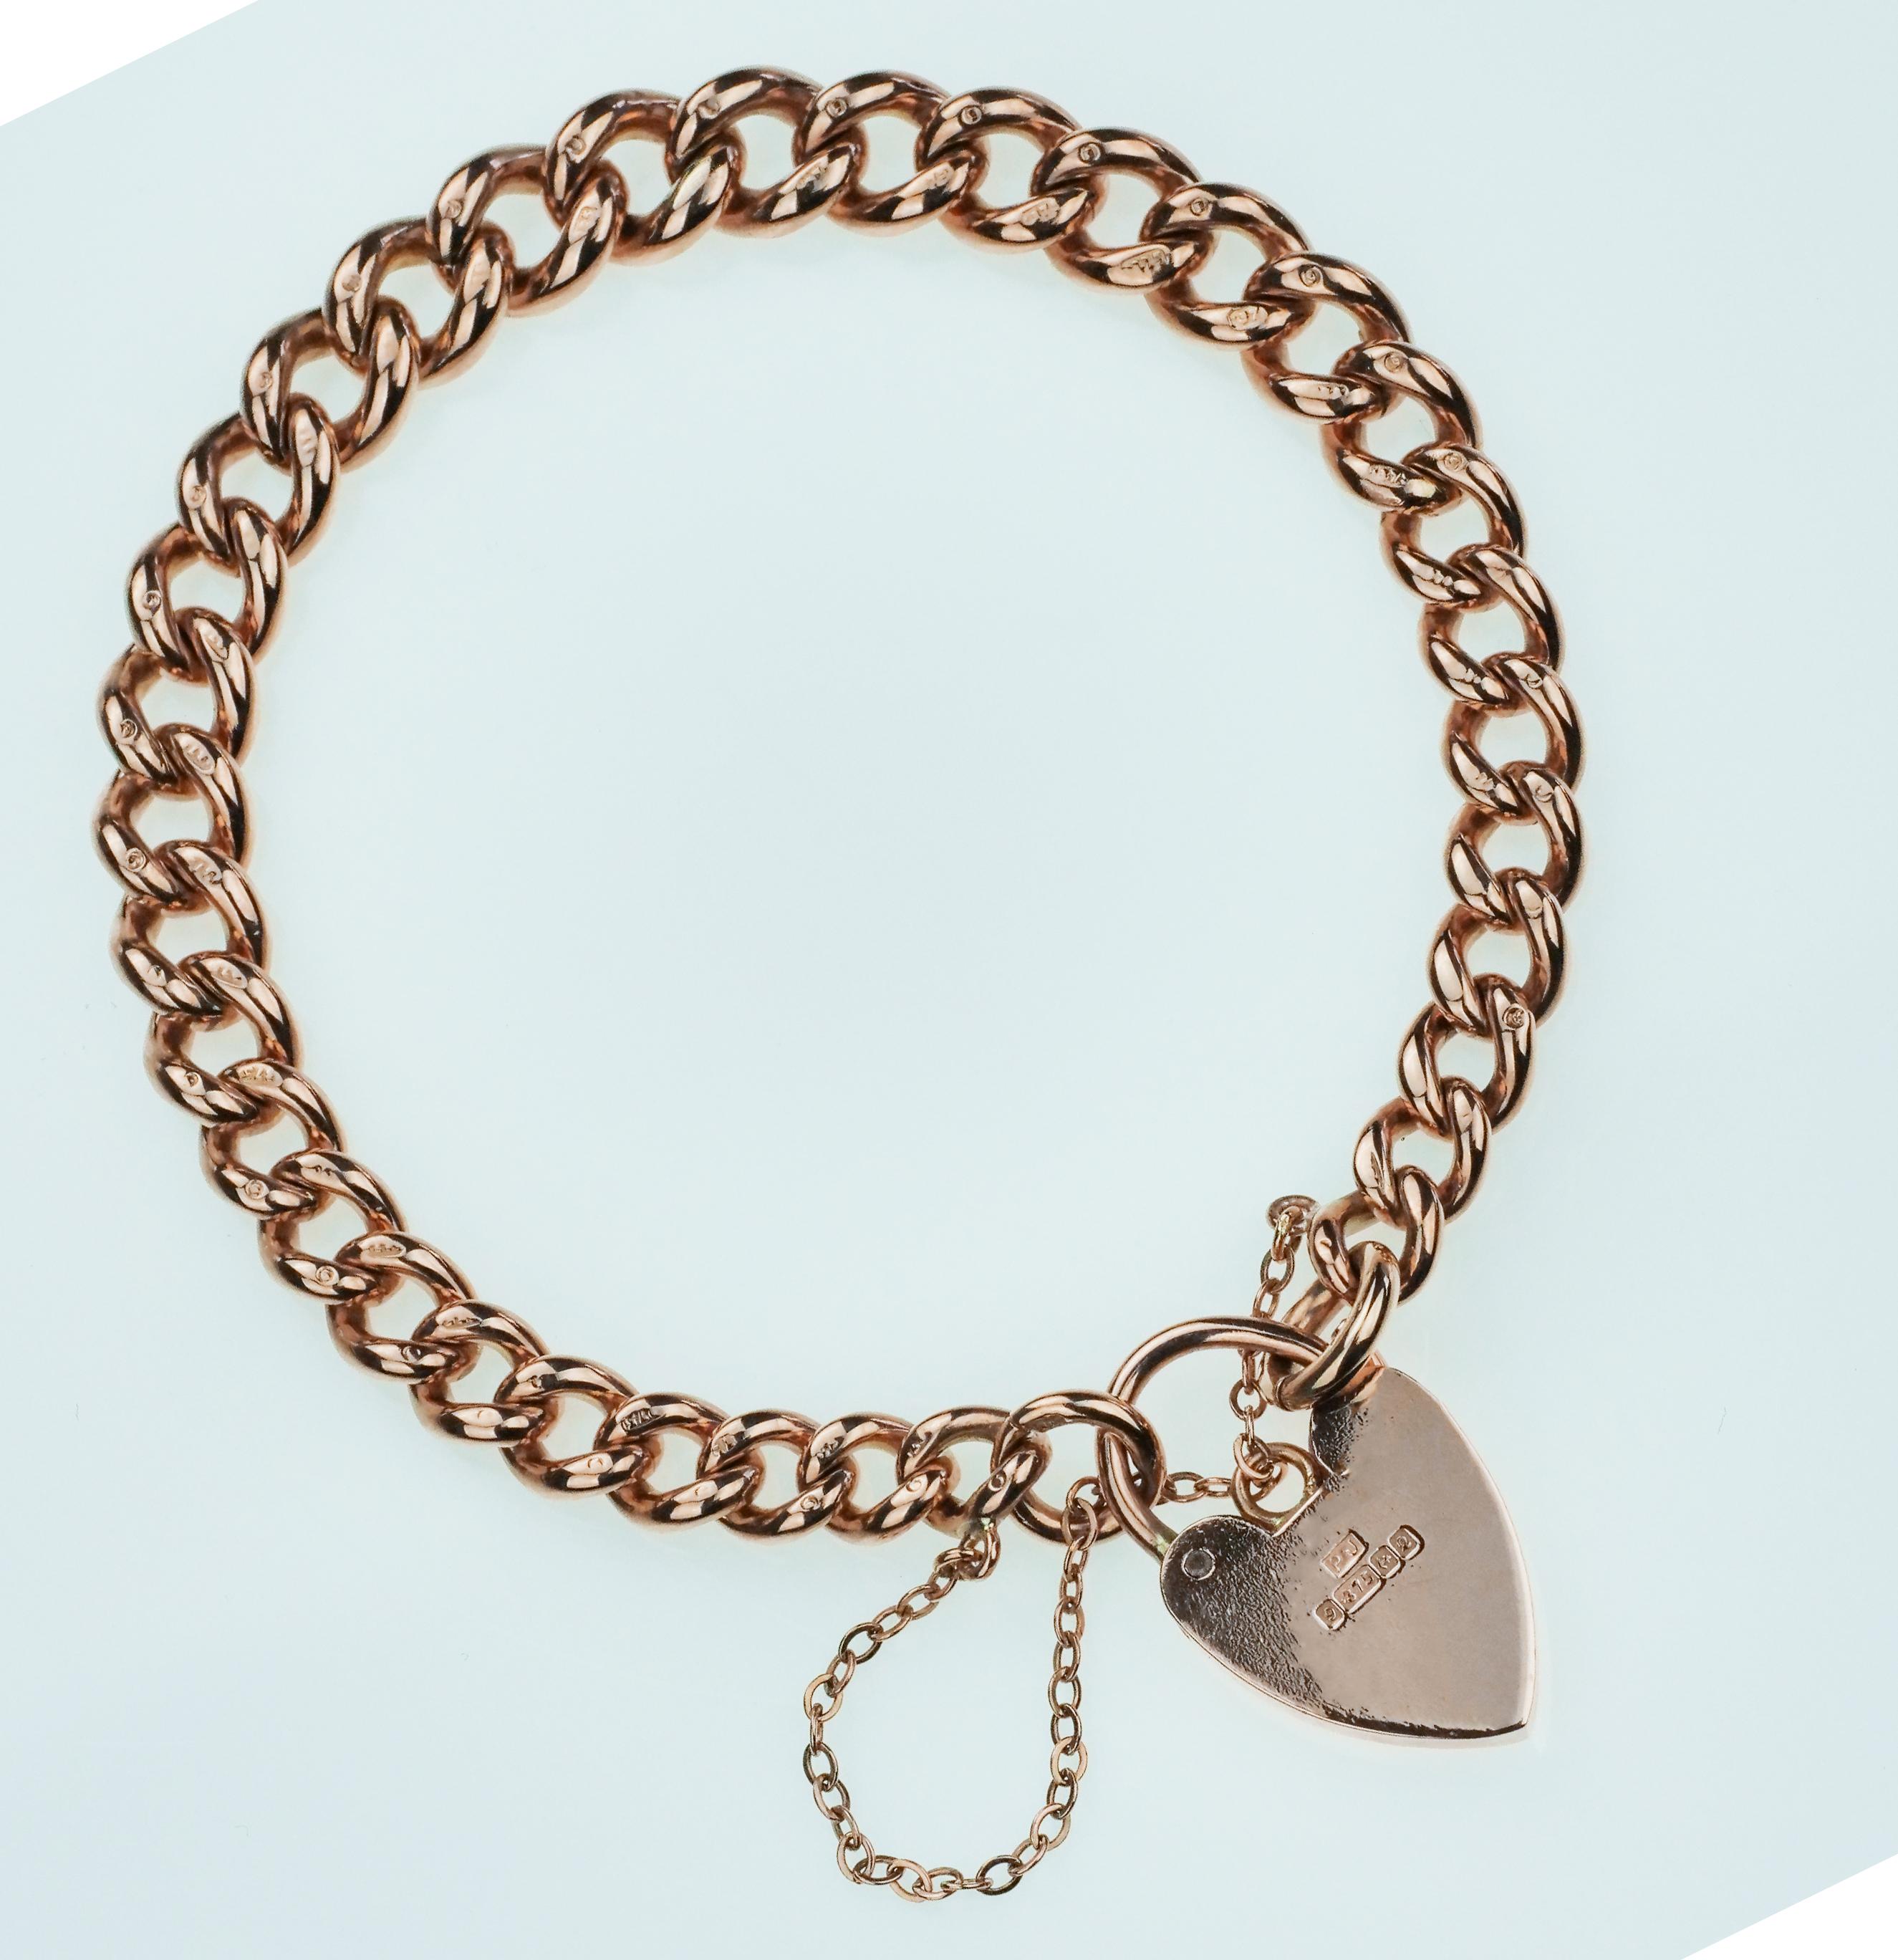 Rose gold chain bracelet with a heart padlock. It consists of chunky solid links of gorgeous seamlessly smooth rose gold curb link bracelet and British hallmarked on every single link. With a heart padlock which seals the open ends of the bracelet